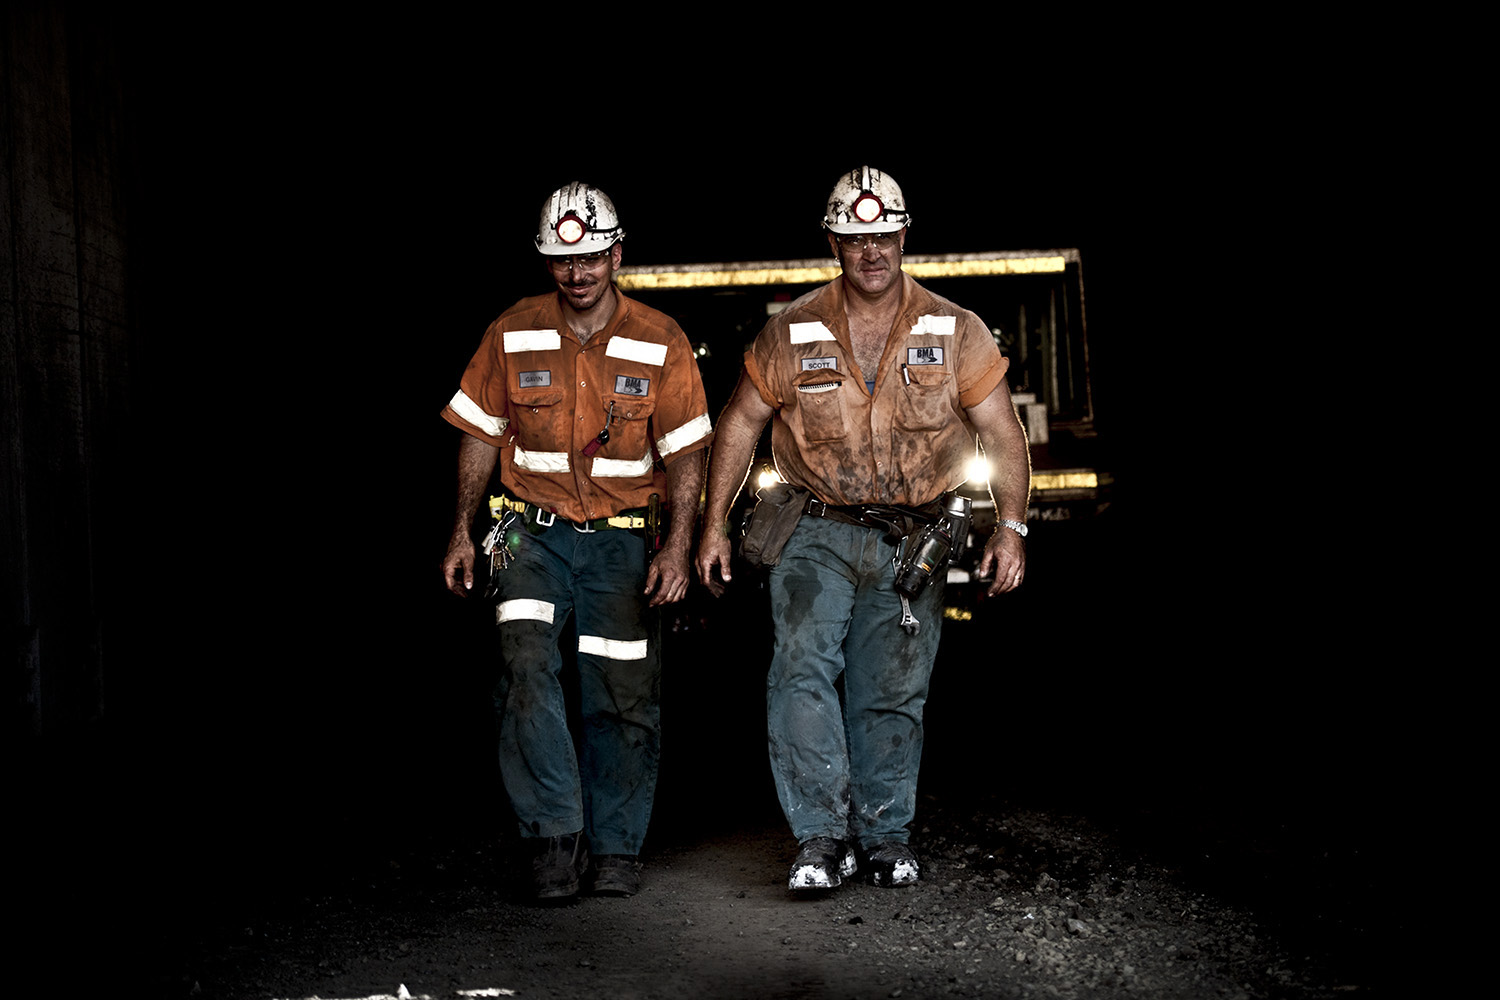 image of AARONTAIT COPYRIGHTED 2014 244 MINING PHOTOGRAPHER COAL GOLD IRON ORE RESOURCE ENERGY ENVIRONMENT CLEAN POSITIVE ENGINEERING EXPLORATION RESEARCH TECHNOLOGY EMPLOYMENT FIFO ECONOMY AUSTRALIA SAFETY MI